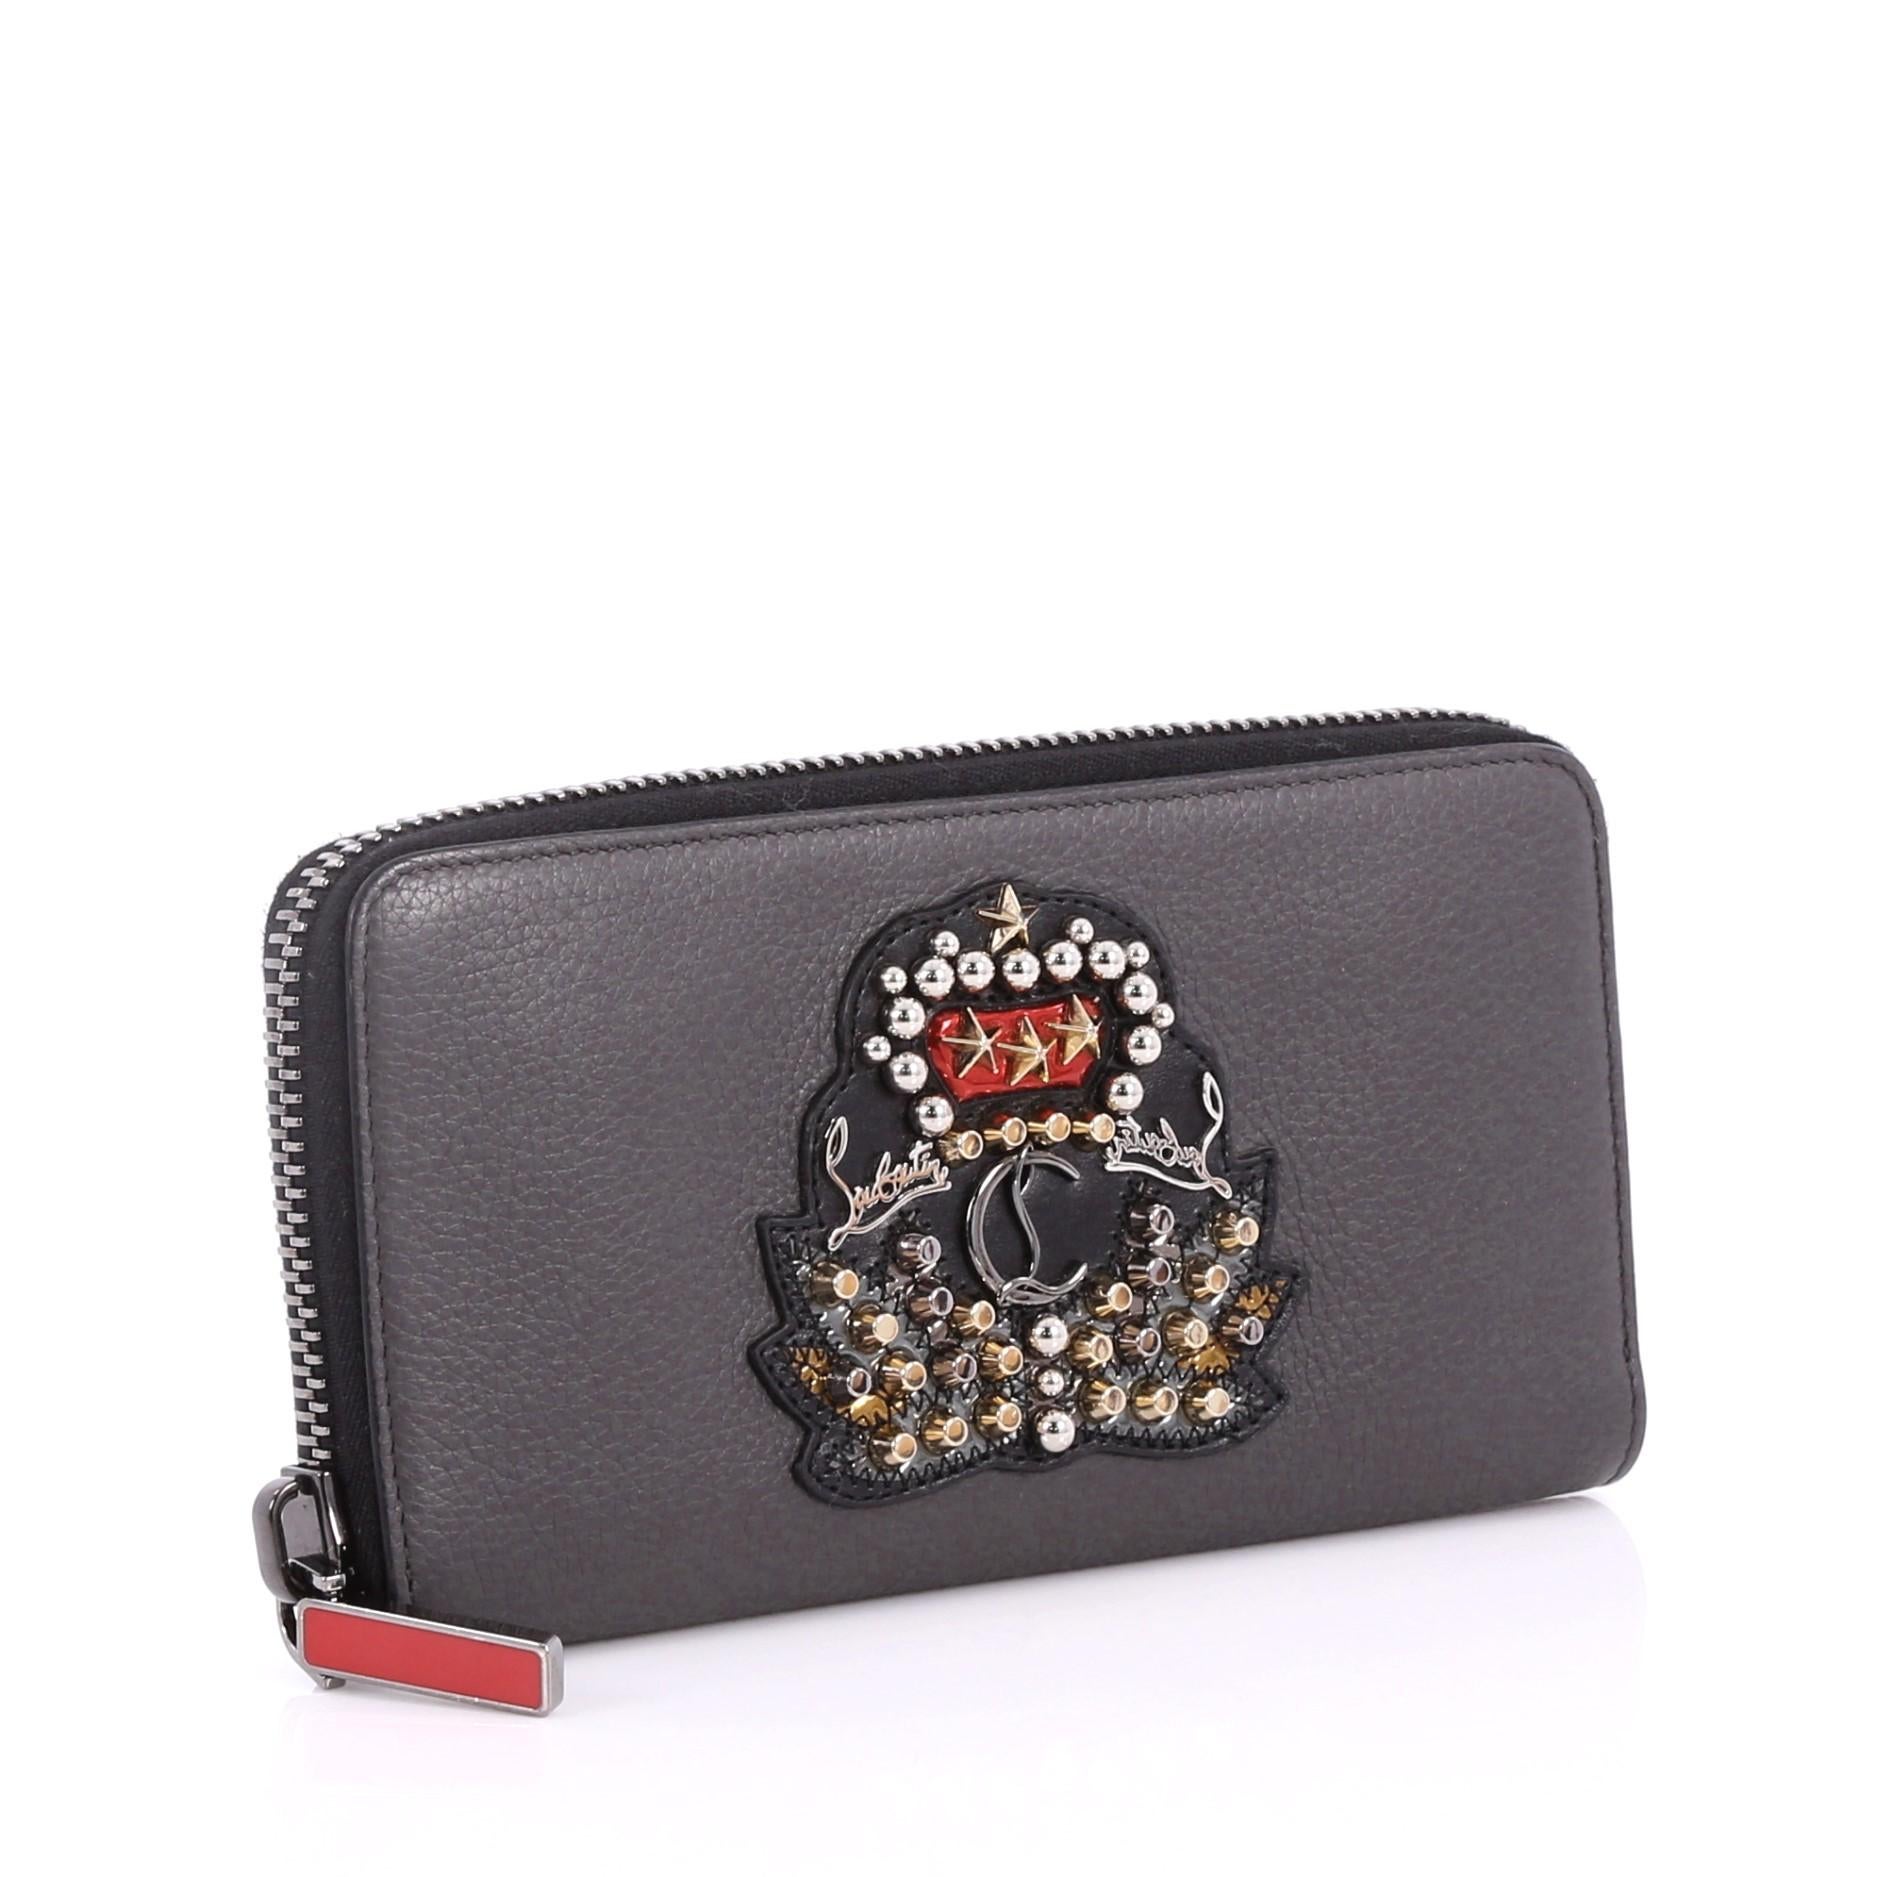 Black Christian Louboutin Panettone Wallet Embroidered Studded Leather